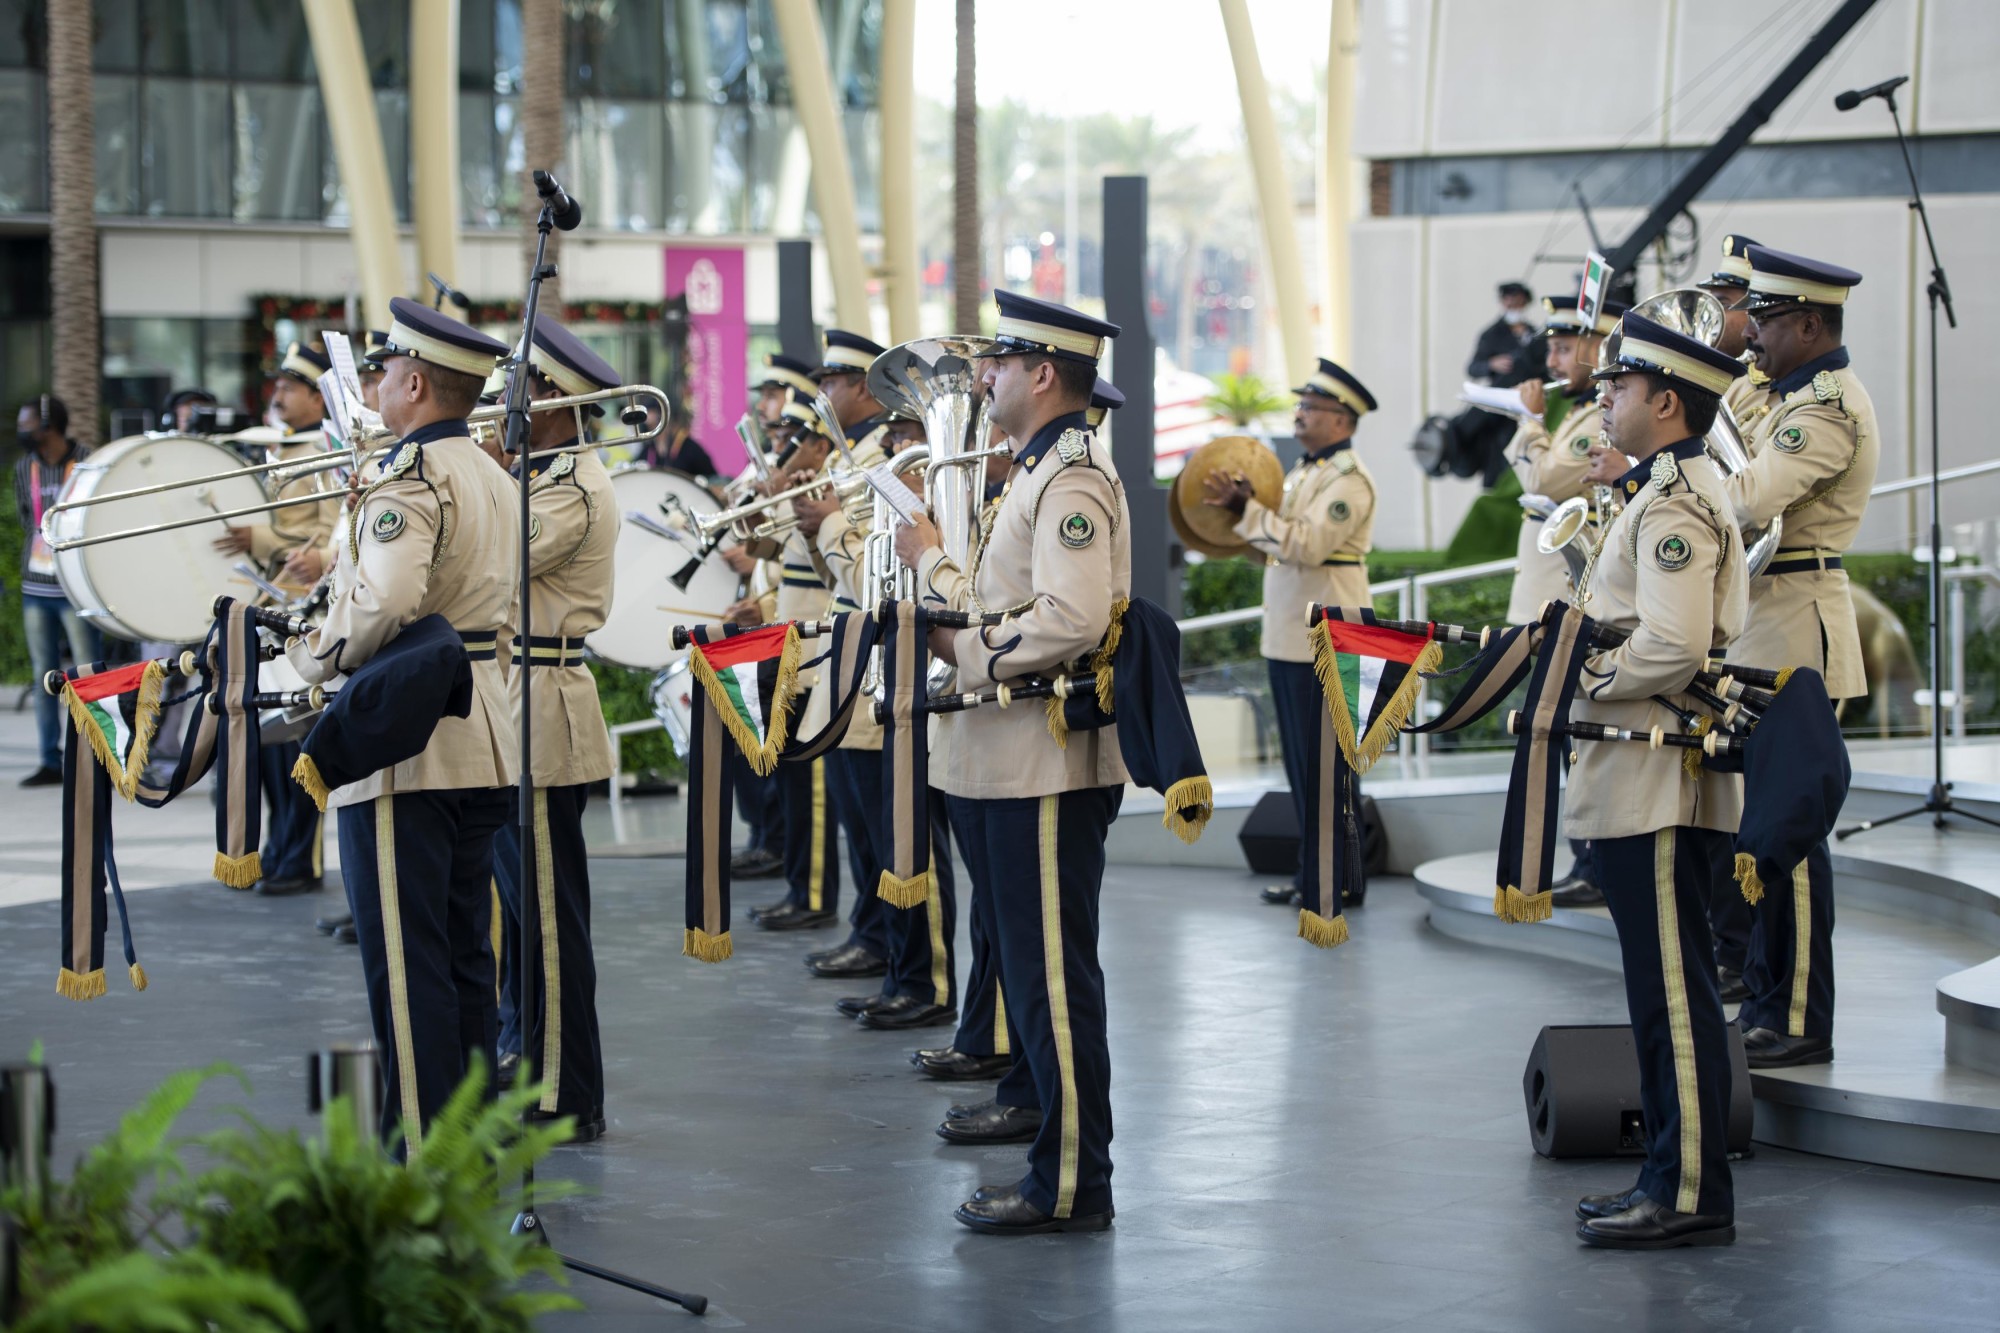 Marching Band performance during the League of Arab States Honour Day Ceremony in Al Wasl Plaza m25259